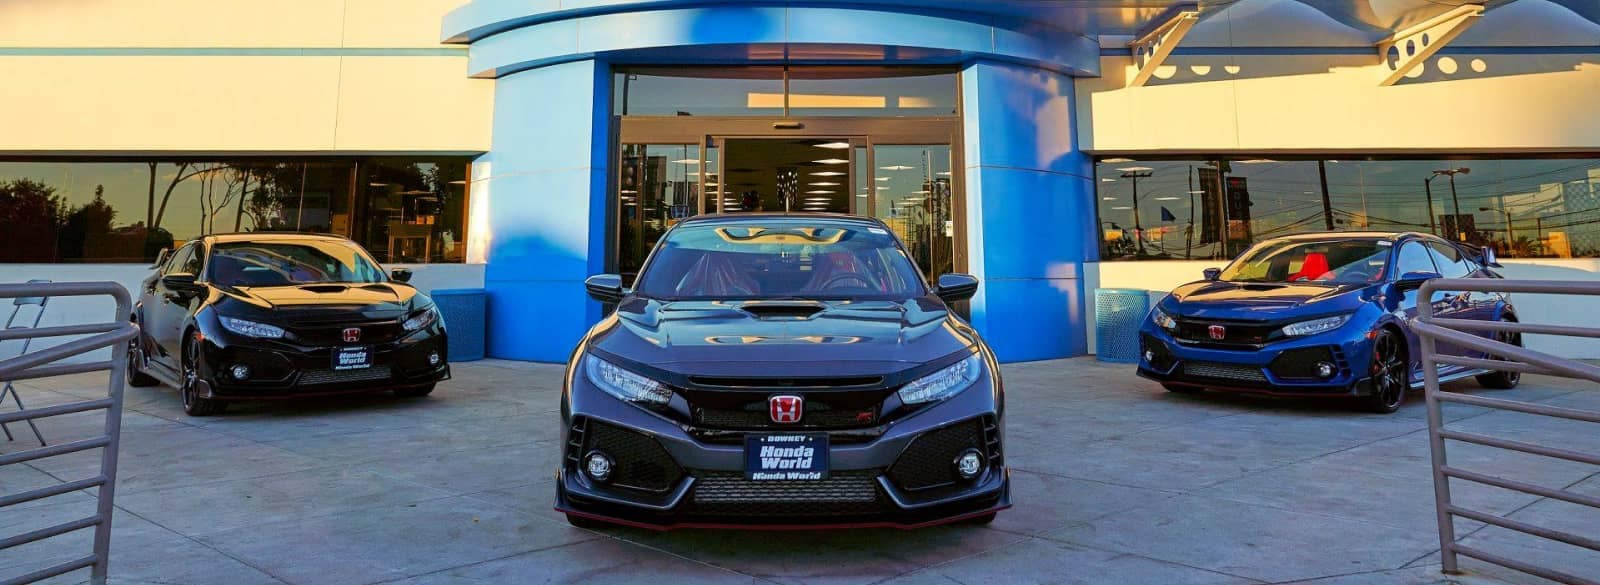 An exterior shot of a Honda dealership during the day